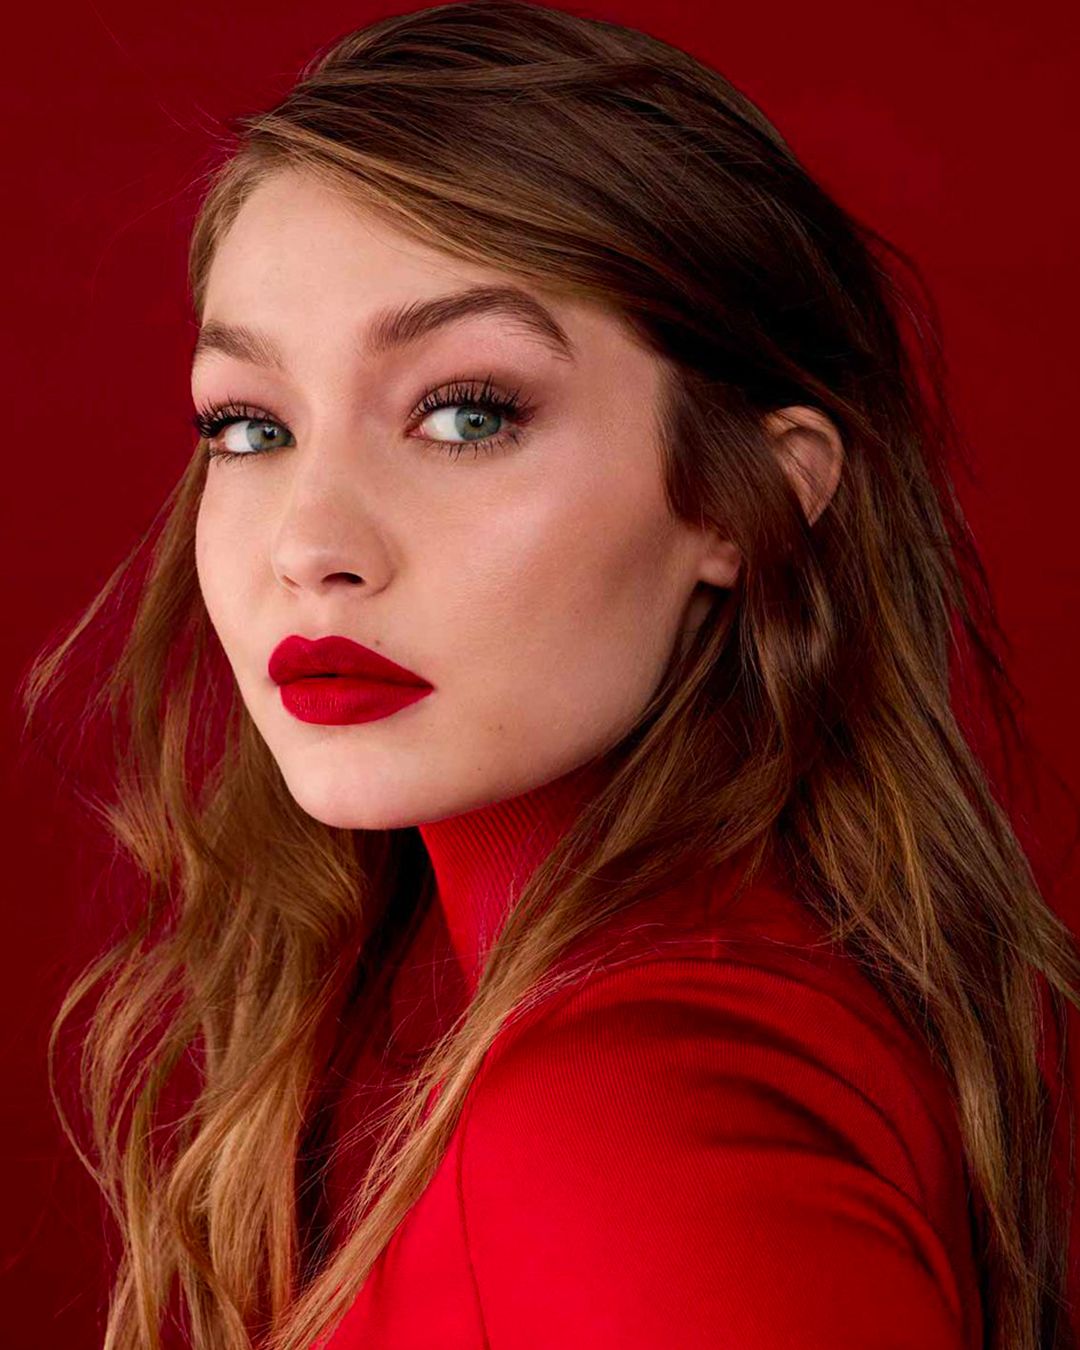 5 Things to know about the meaning of red lipstick